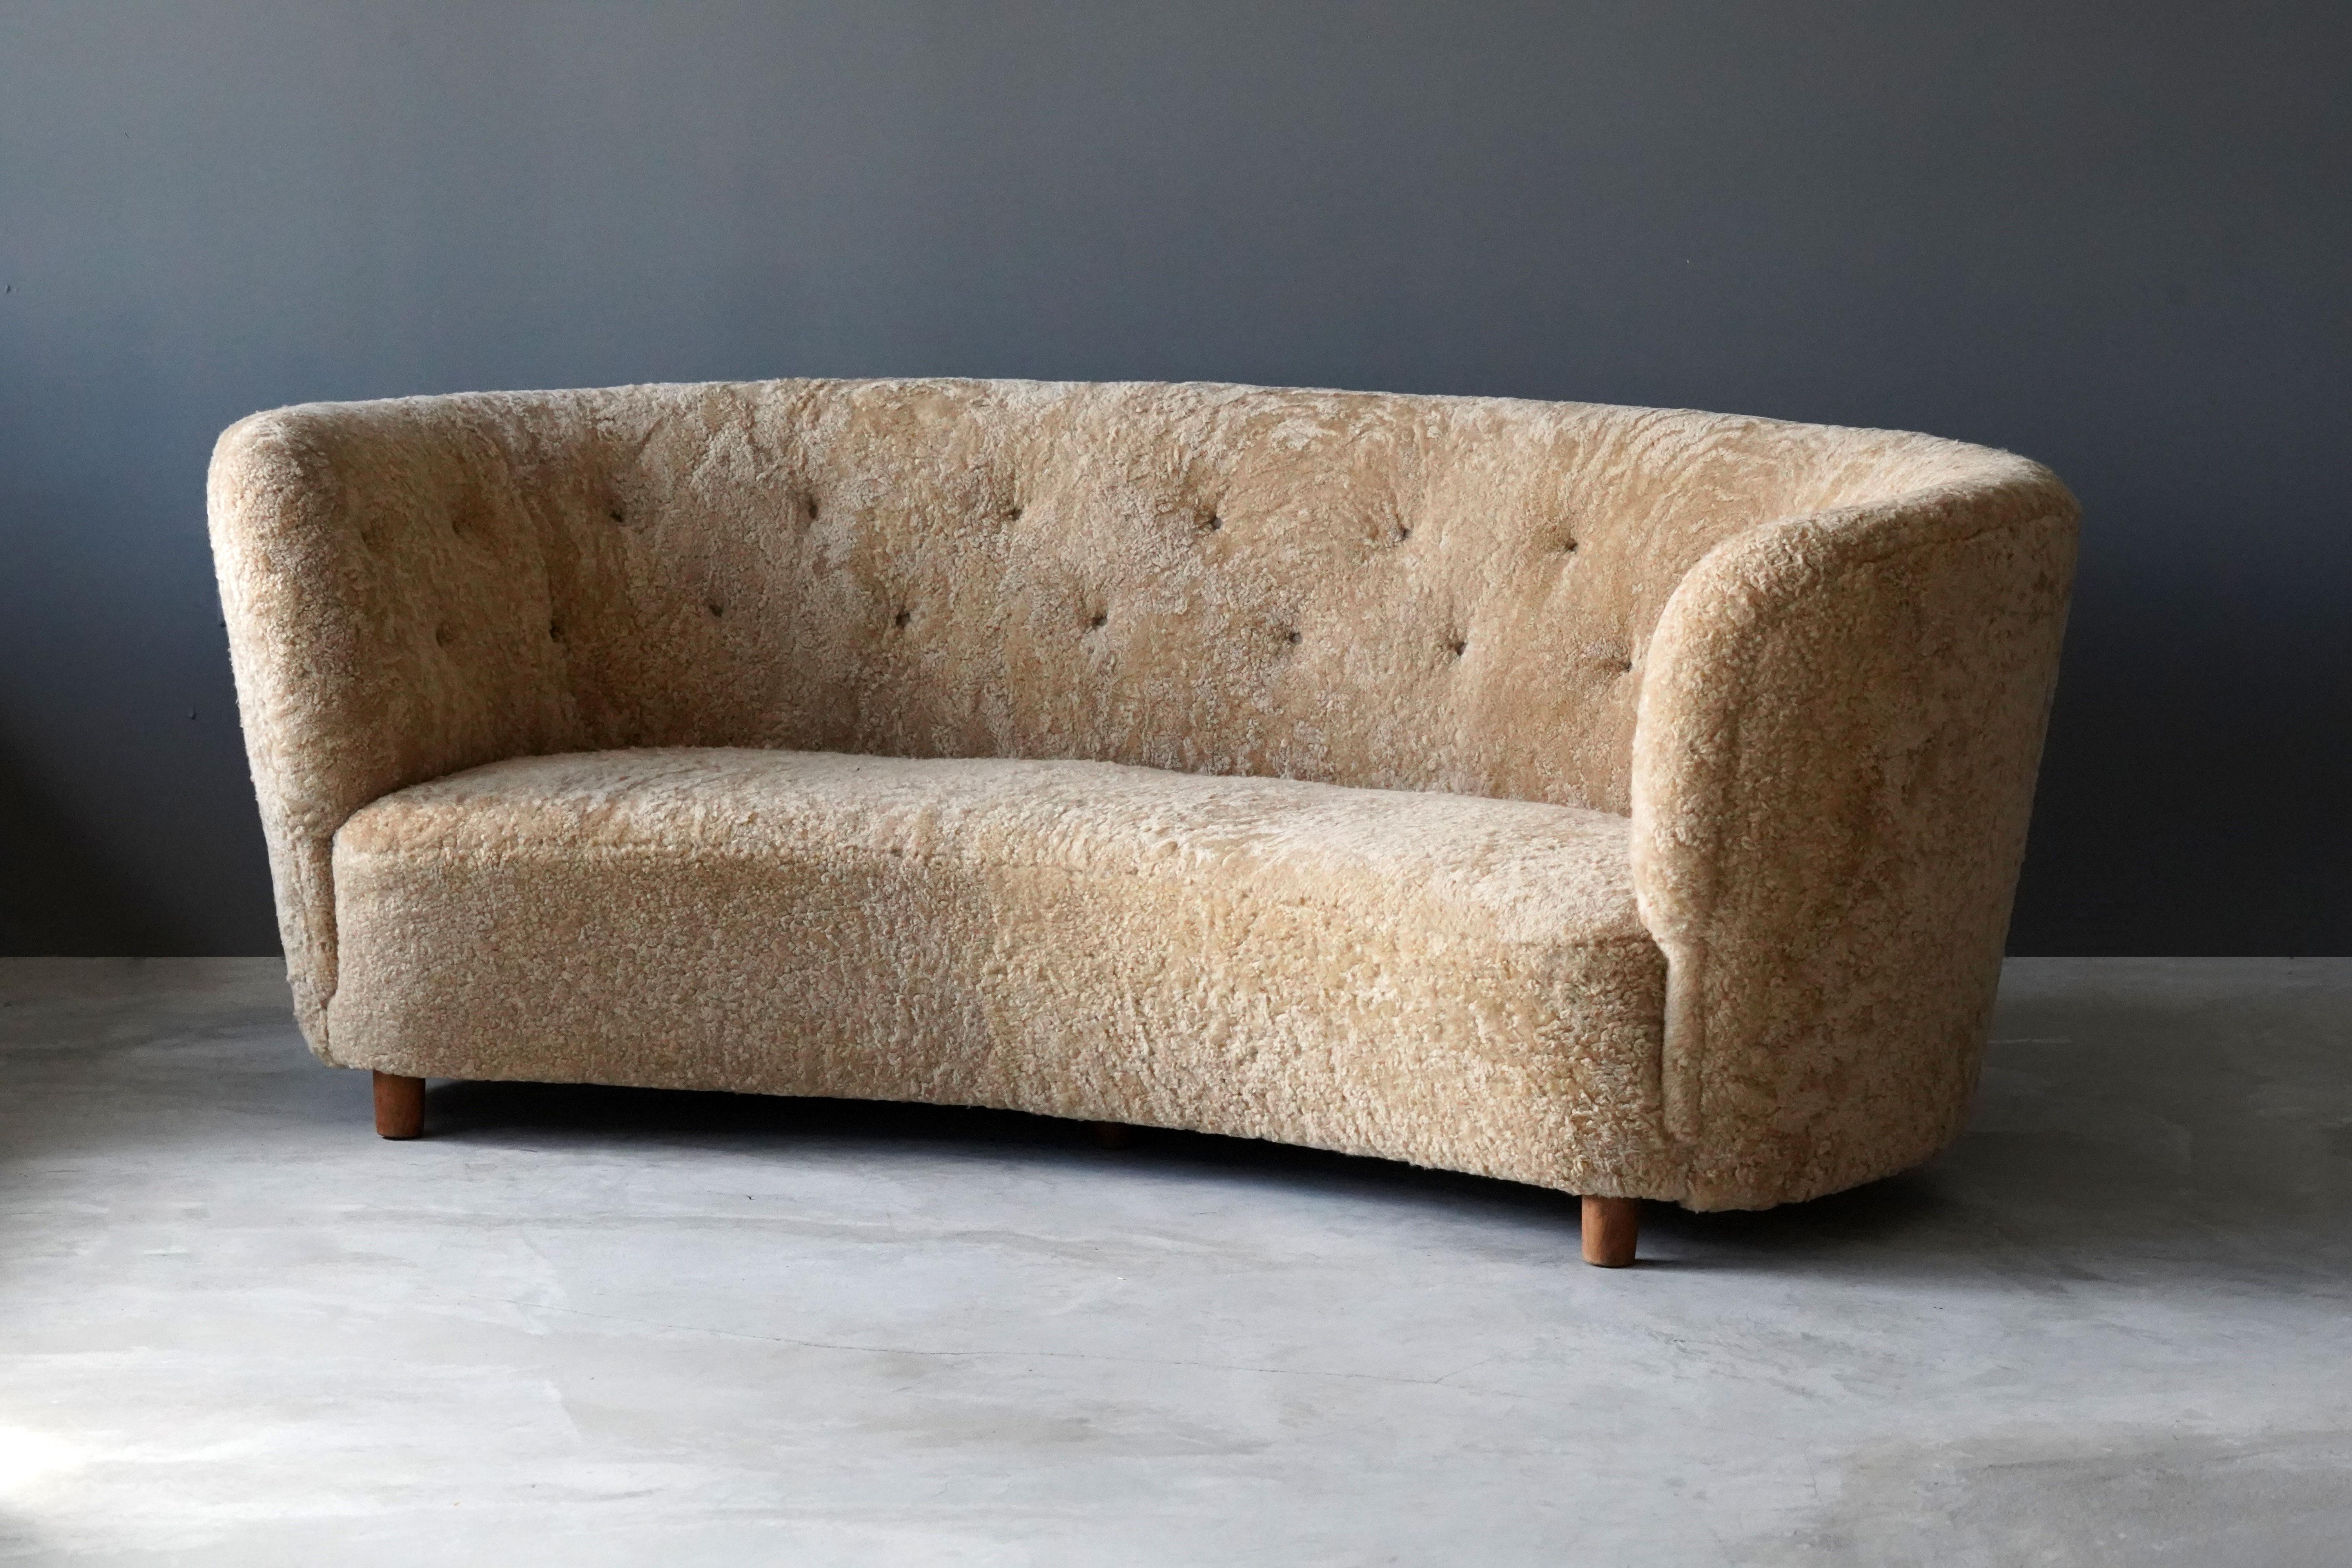 An organic sofa. Produced in Denmark, 1940s. Design attributed to Flemming Lassen. Reupholstered in brand new sheepskin upholstery. 

Compare form to the 